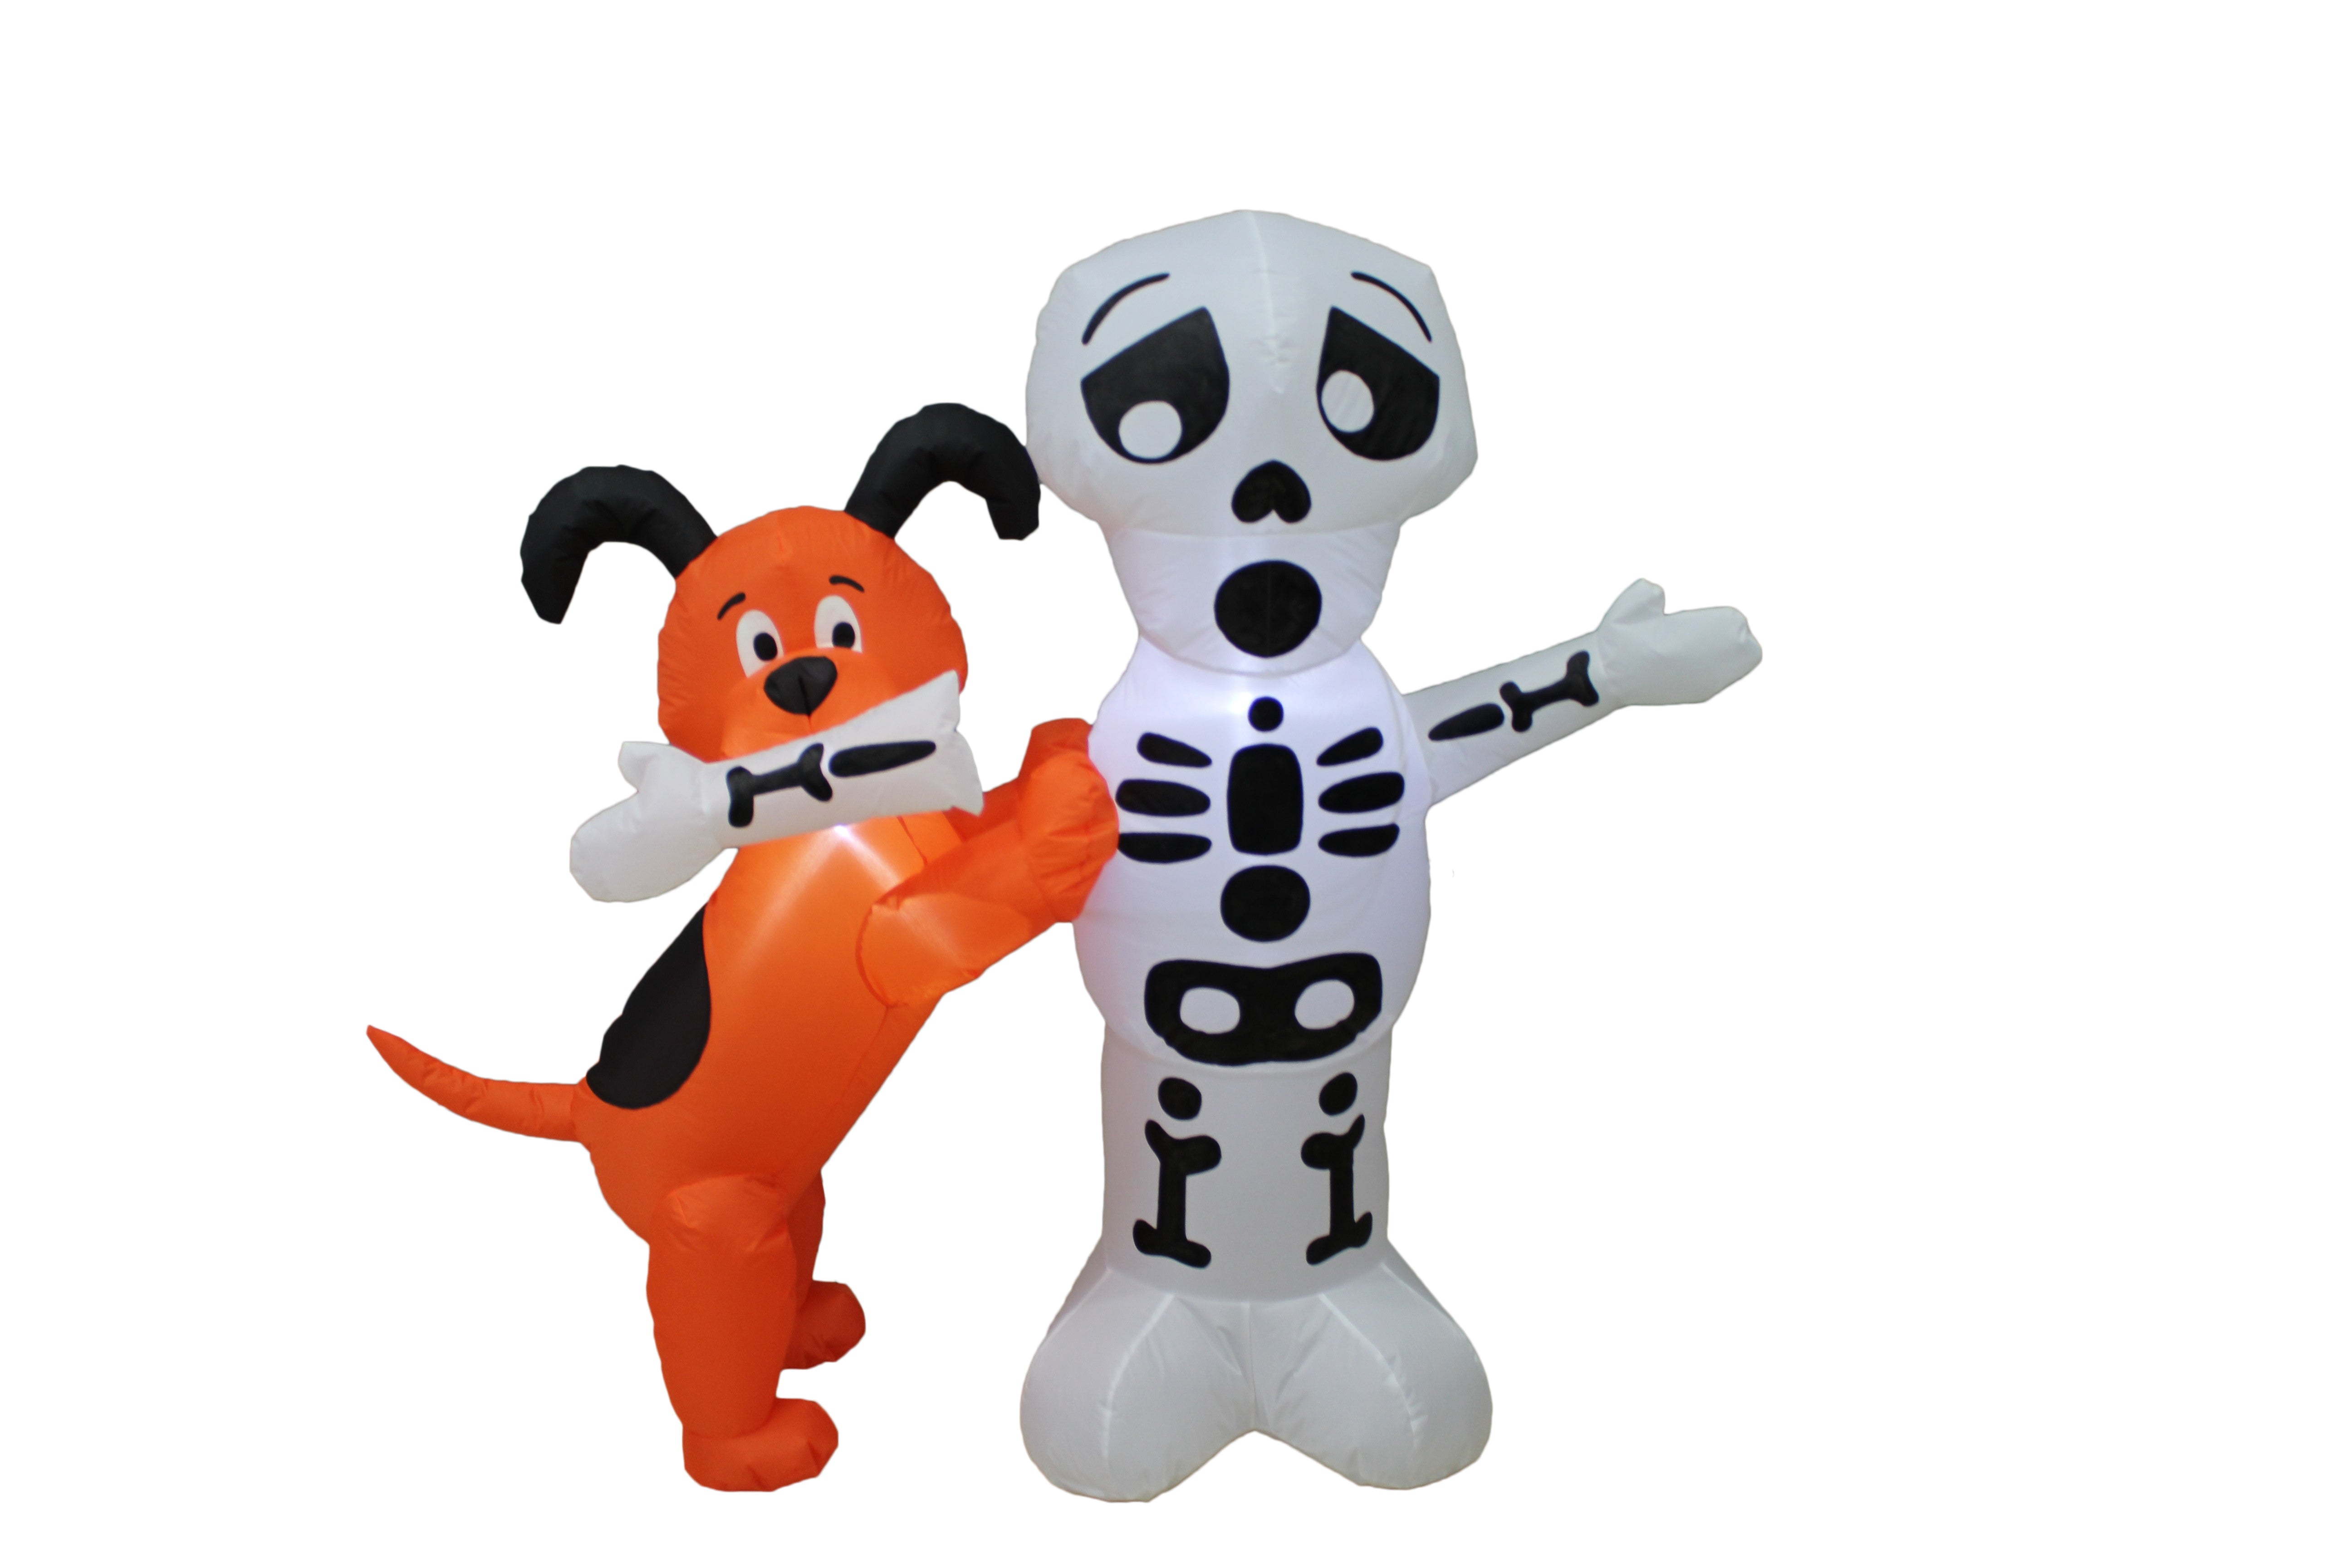 A Holiday Company 4ft Inflatable Skeleton with Dog, 4 ft Tall, Multi